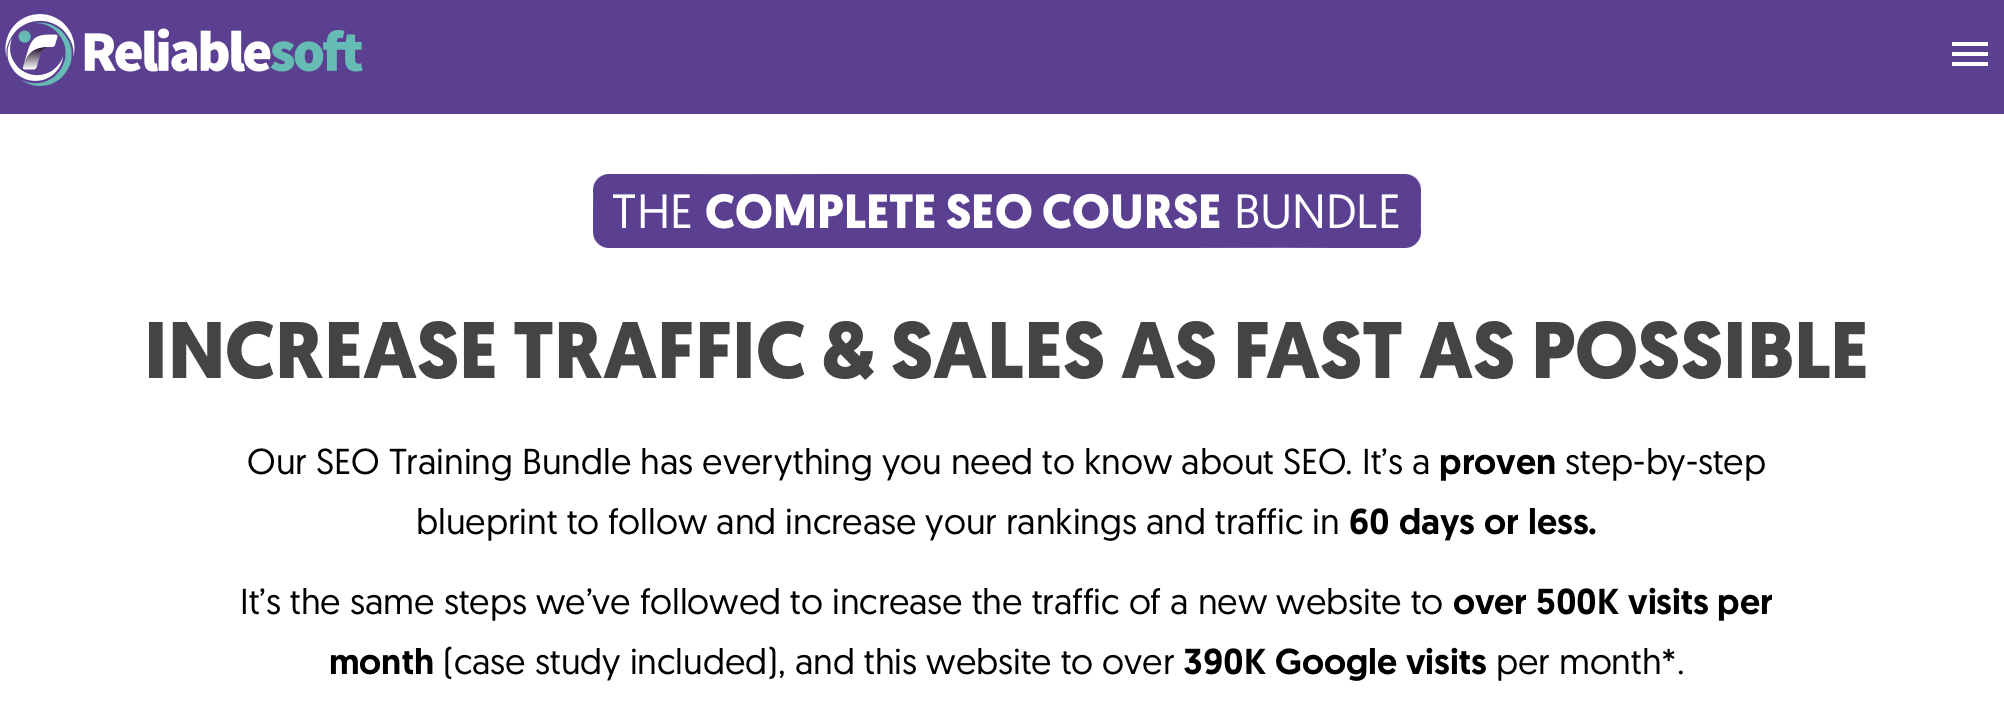 The Complete SEO Course